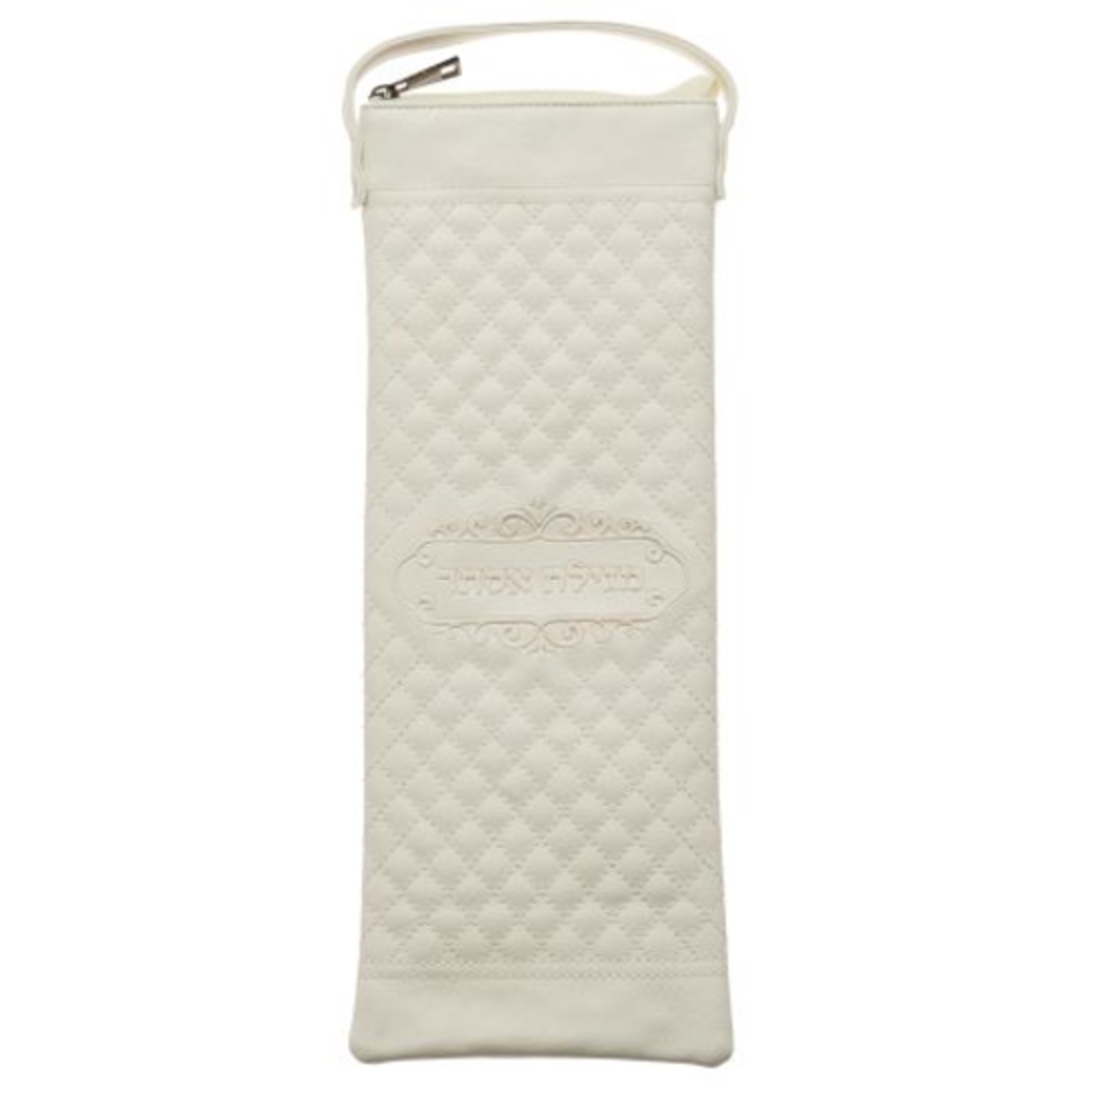 Bag for Esther scroll, white leather 41 * 15 cm